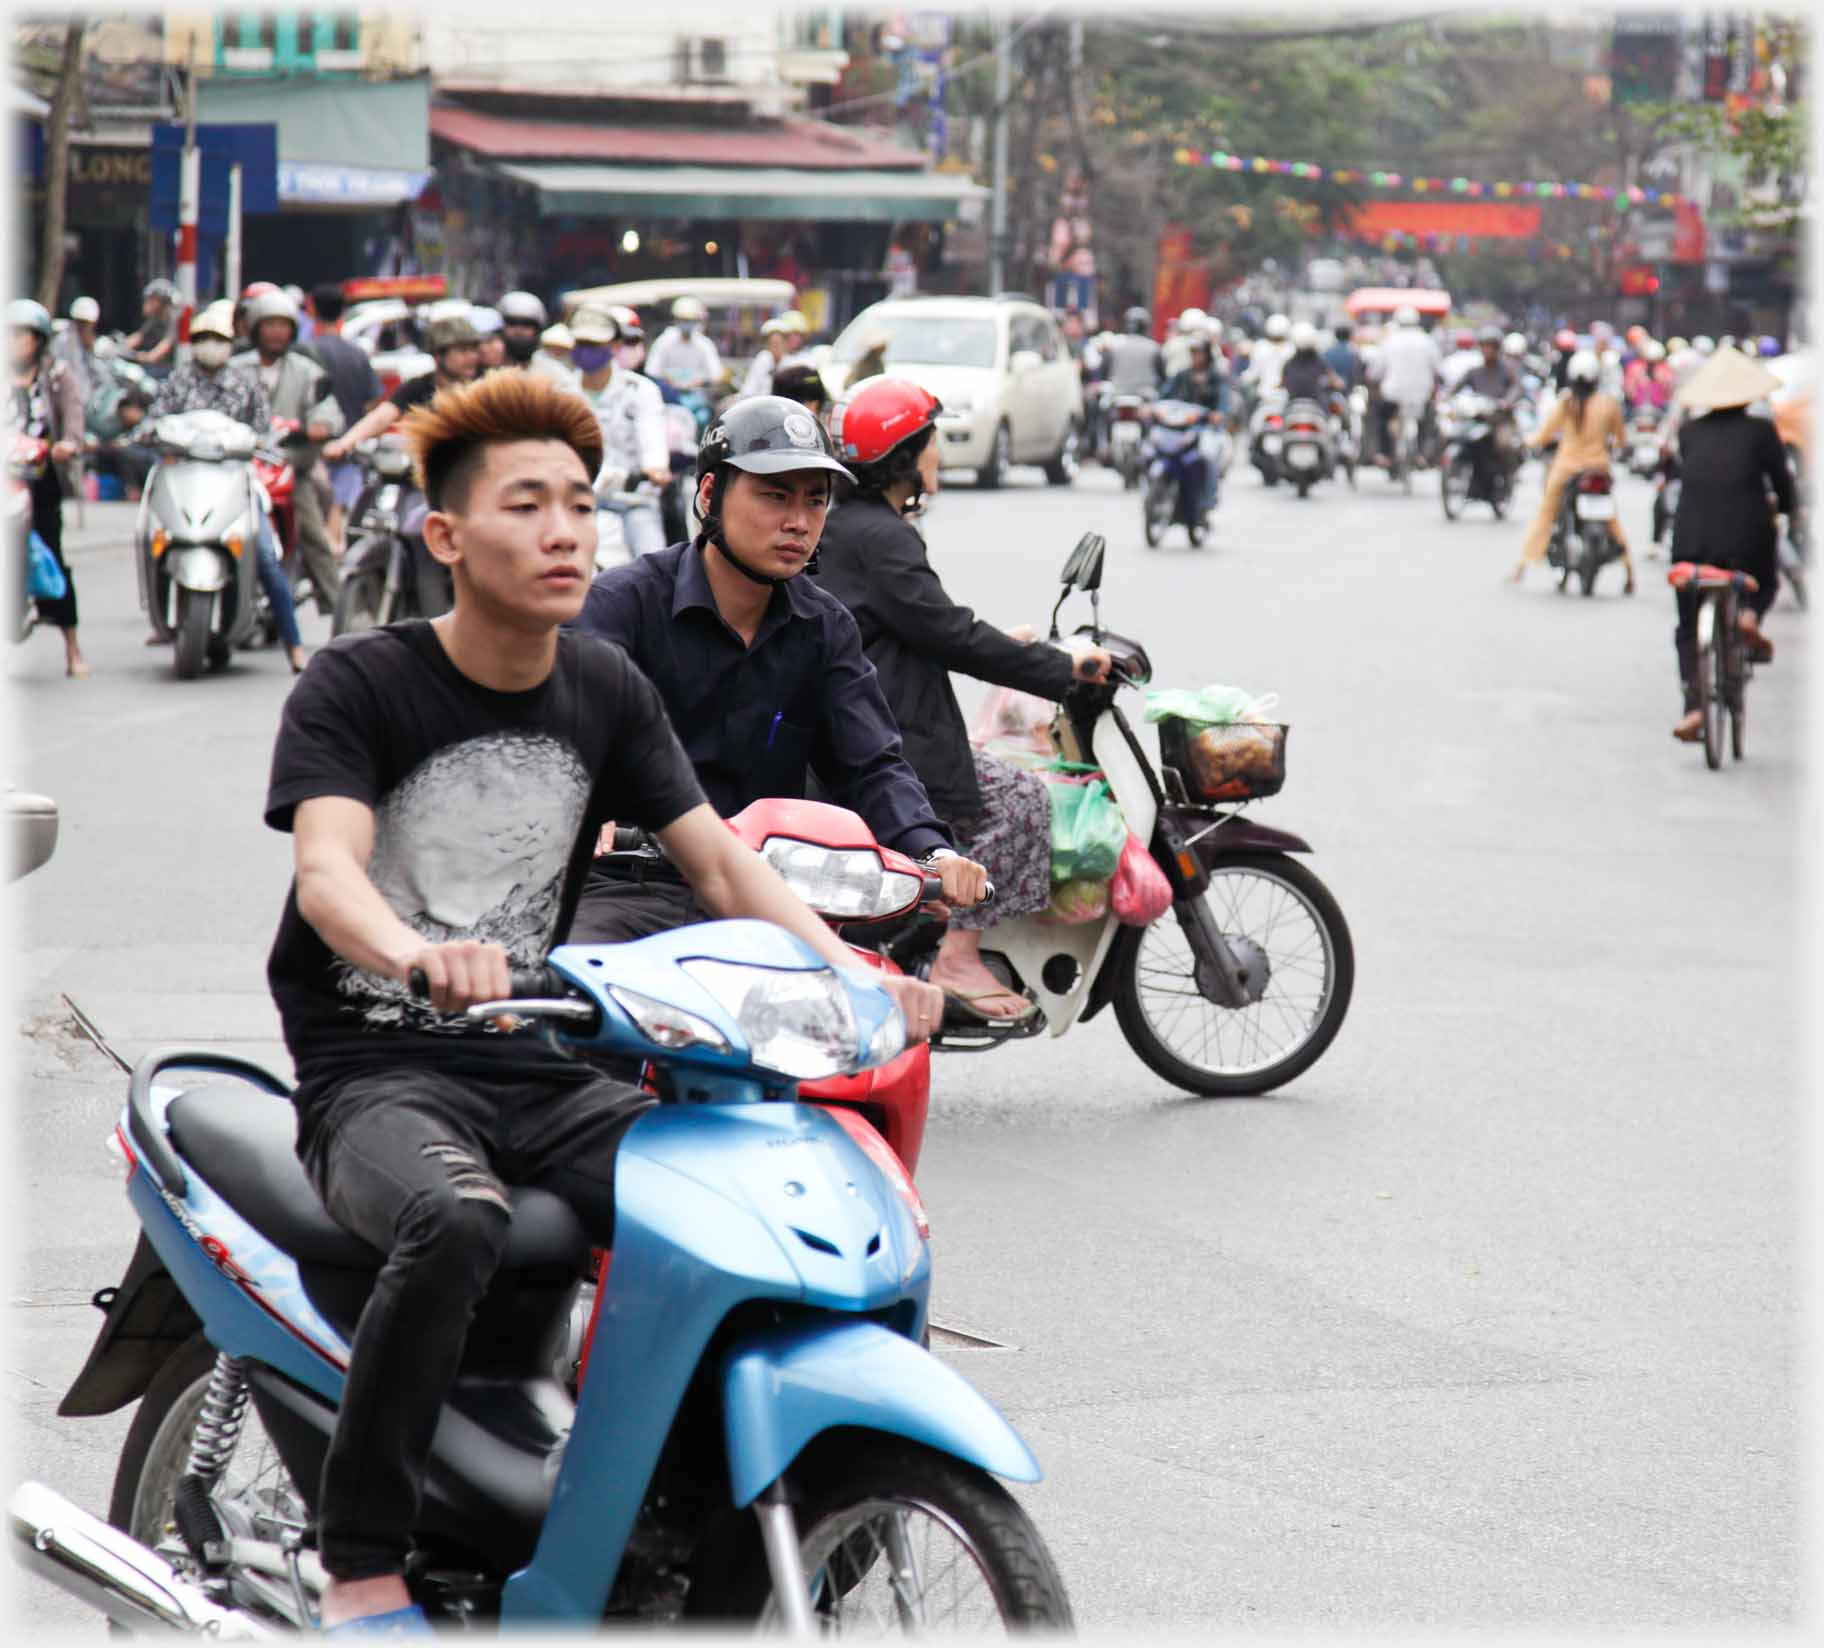 Motorcyclists, nearest one helmetless with reddened hair.